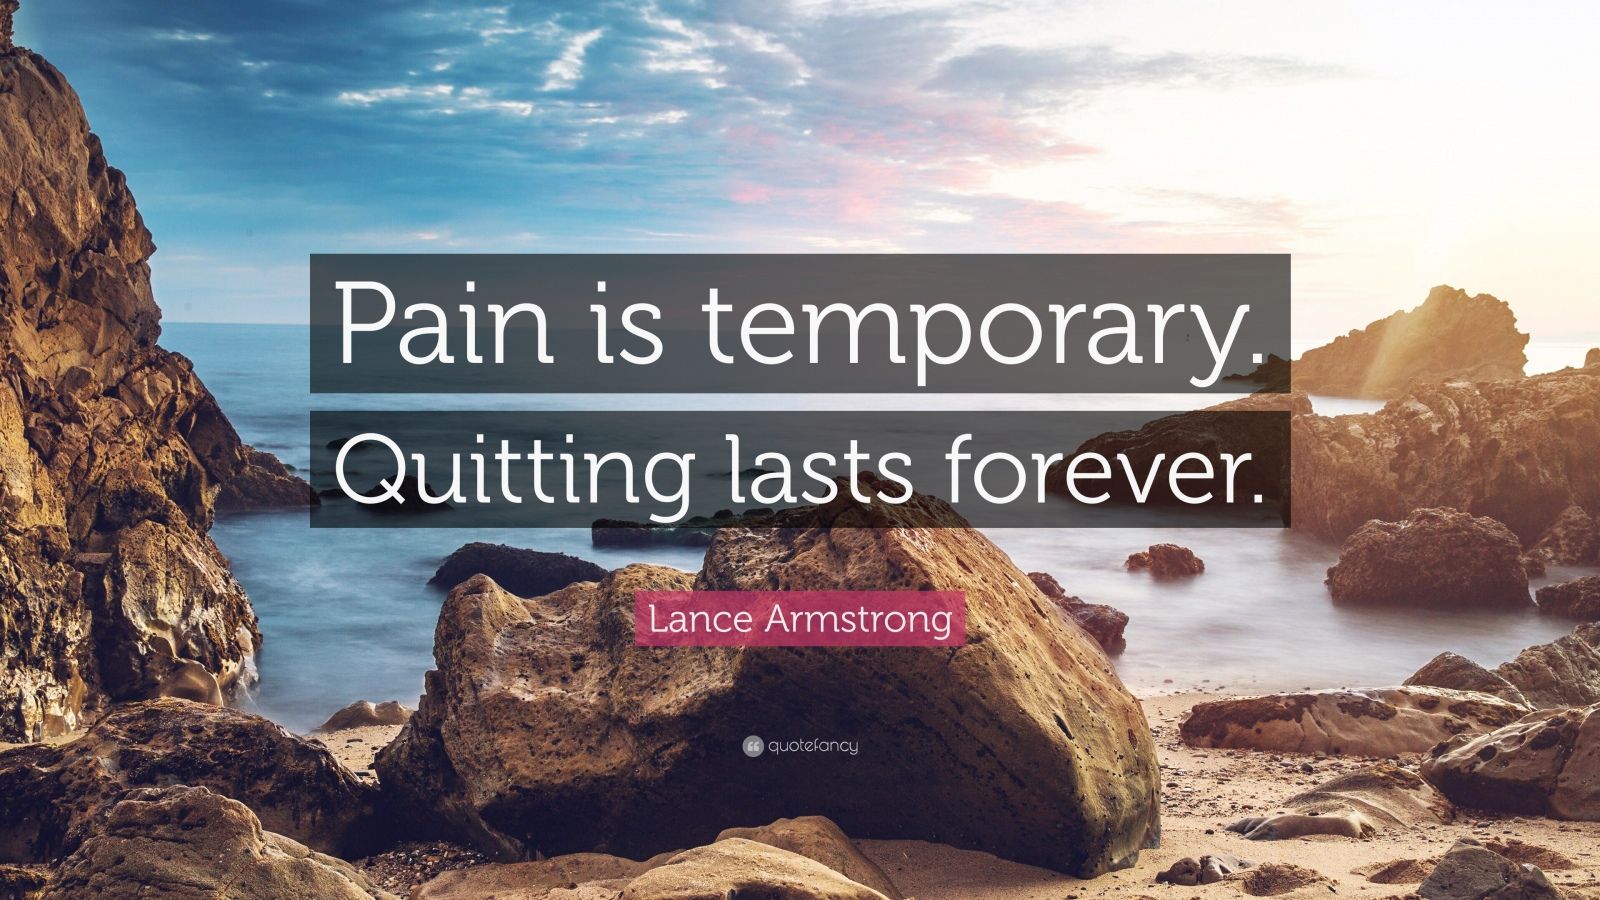 Lance Armstrong Quote: “Pain is temporary. Quitting lasts forever.” (26 ...